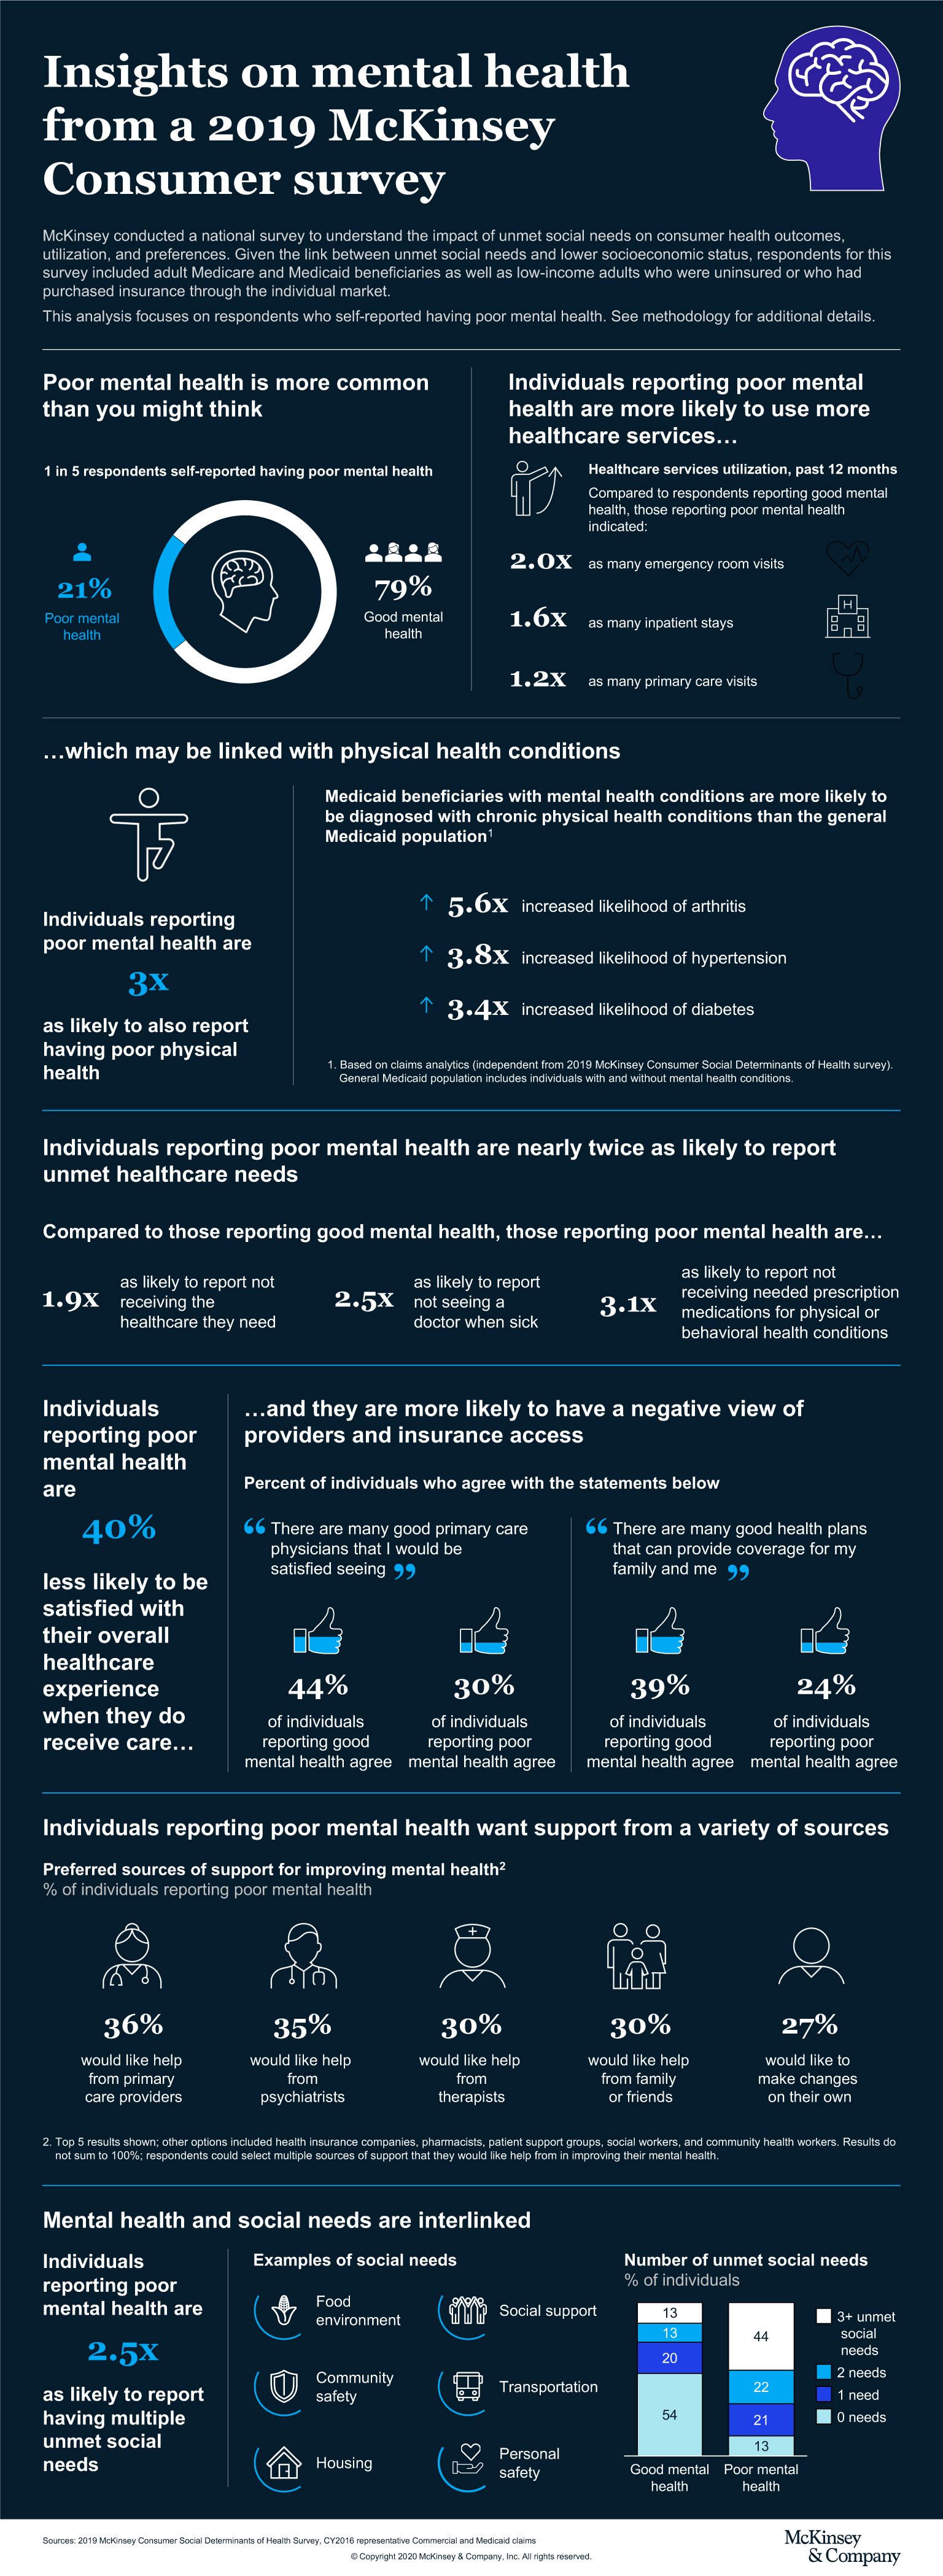 Insights on mental health from a 2019 McKinsey Consumer survey